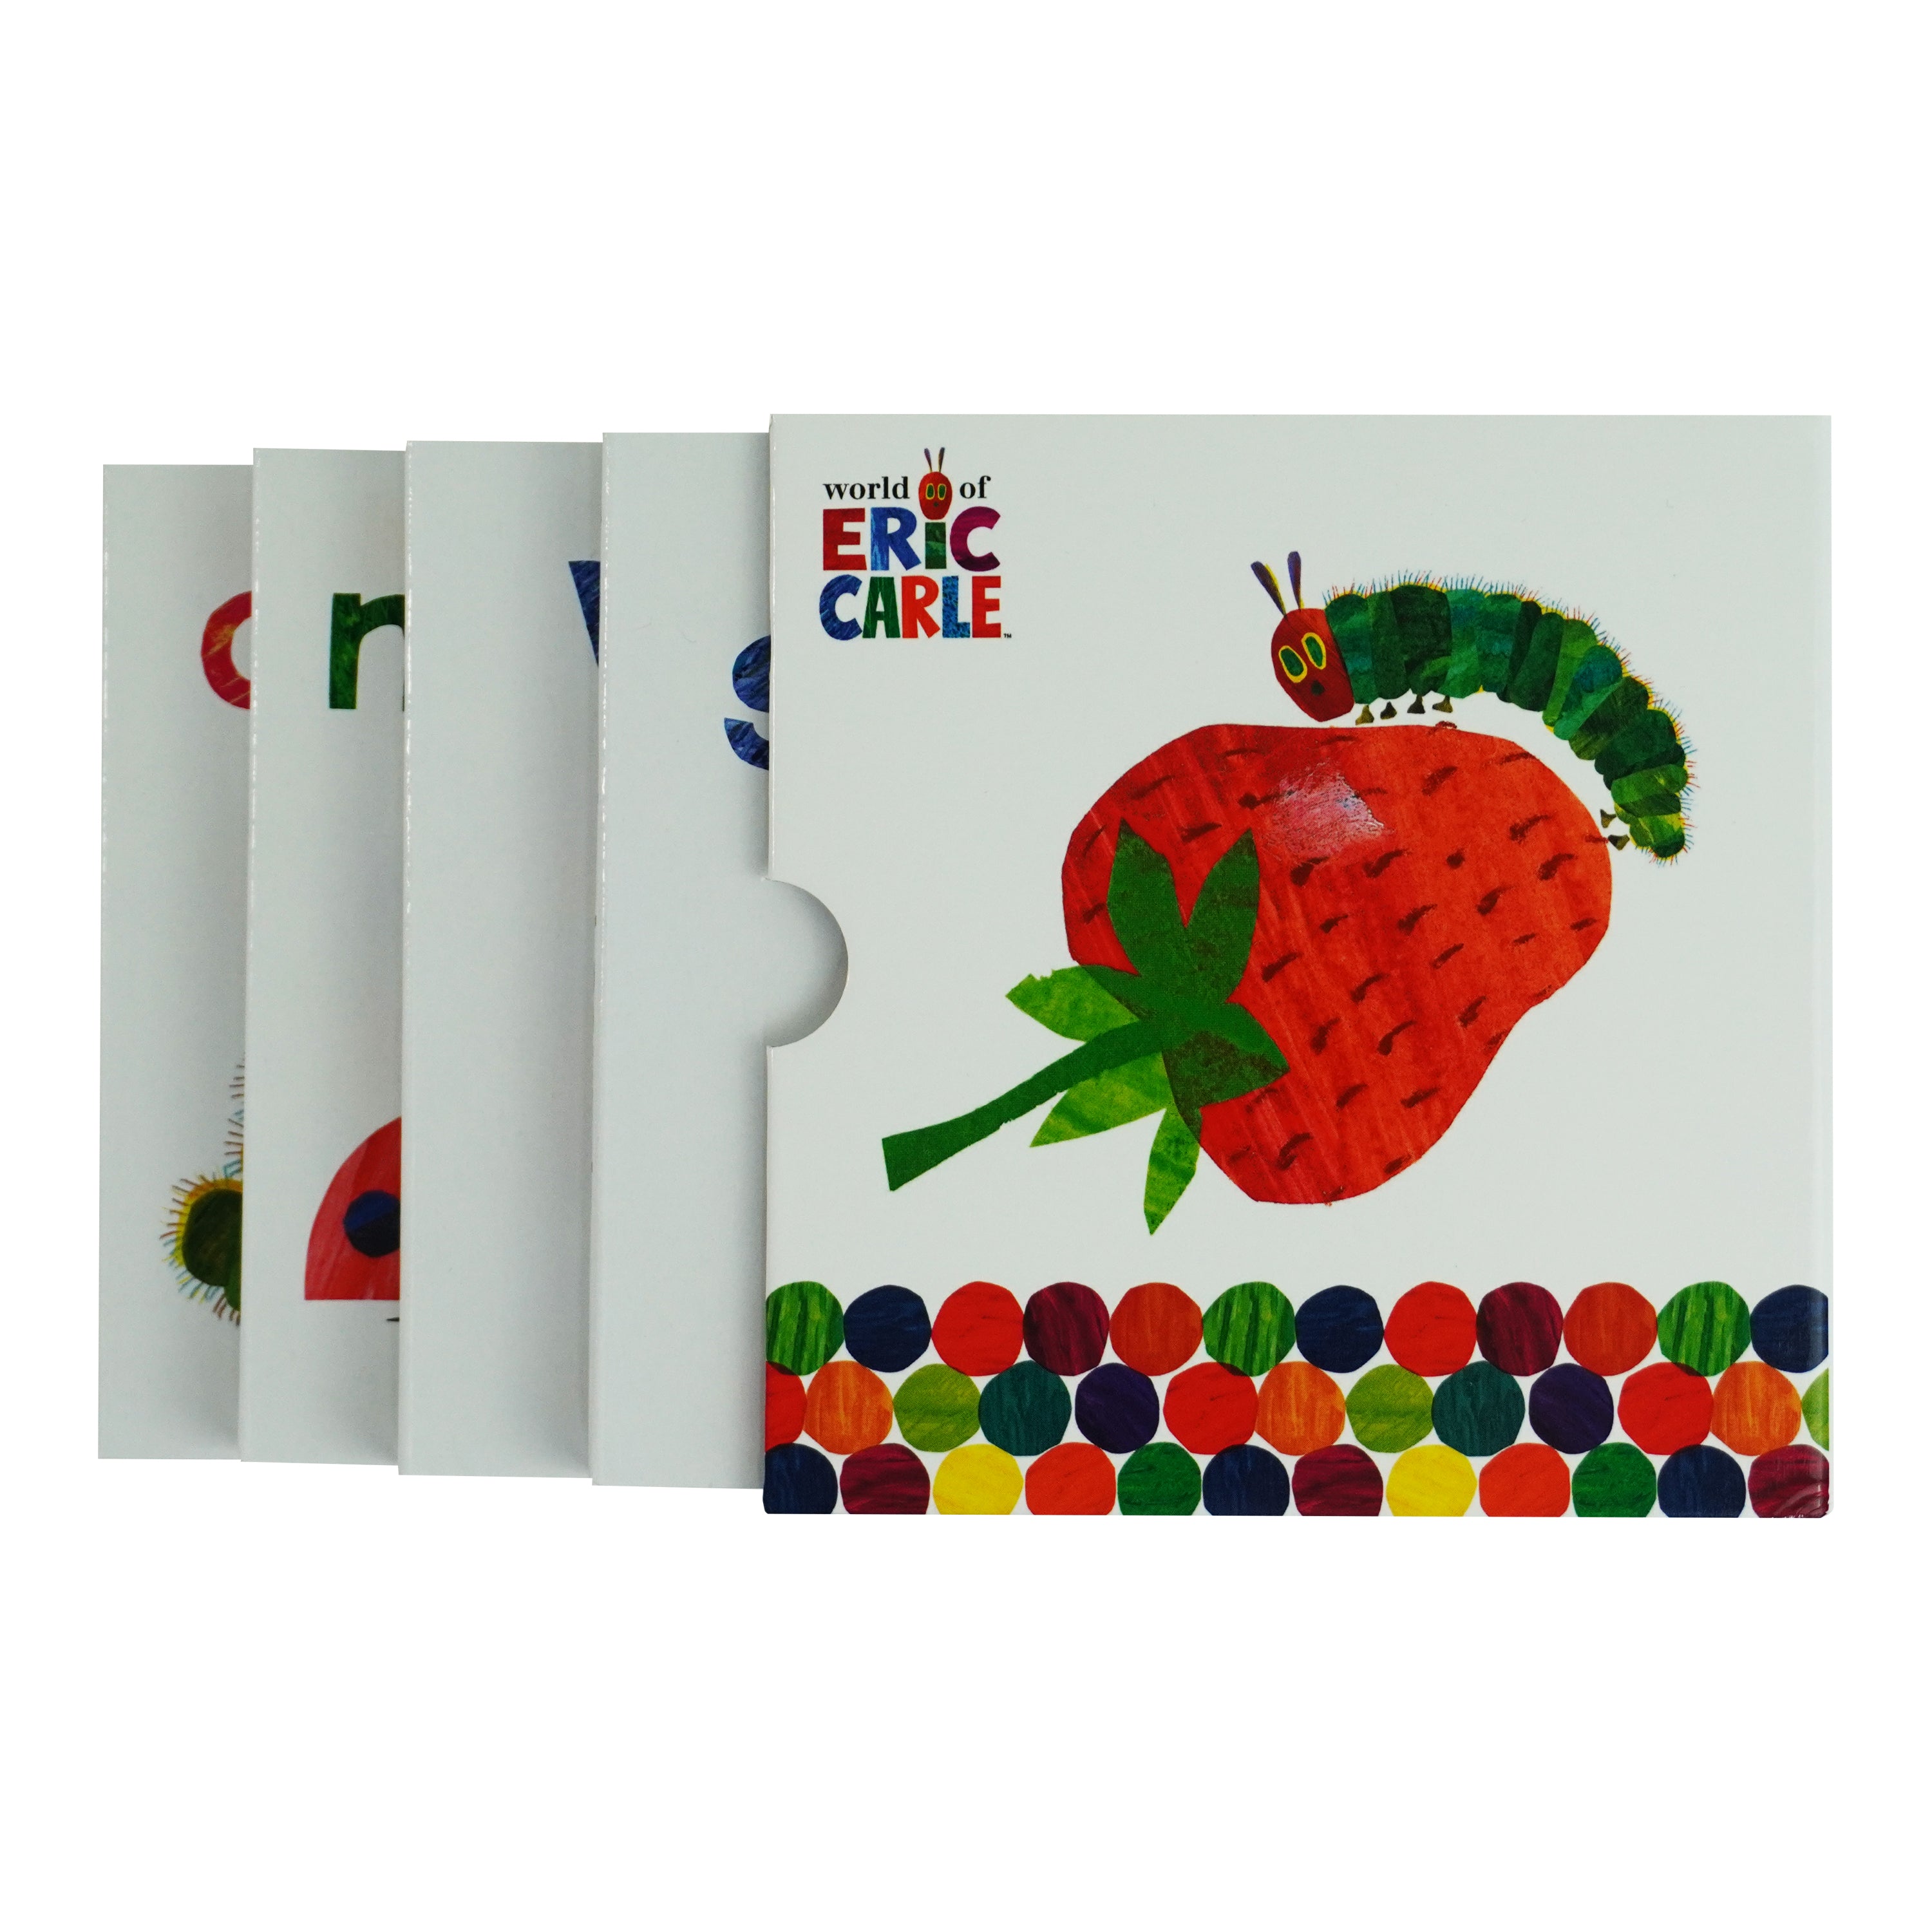 The Very Hungry Caterpillar: My First Library 4 Books Collection Set by Eric Carle - Ages 2+ - Board Book